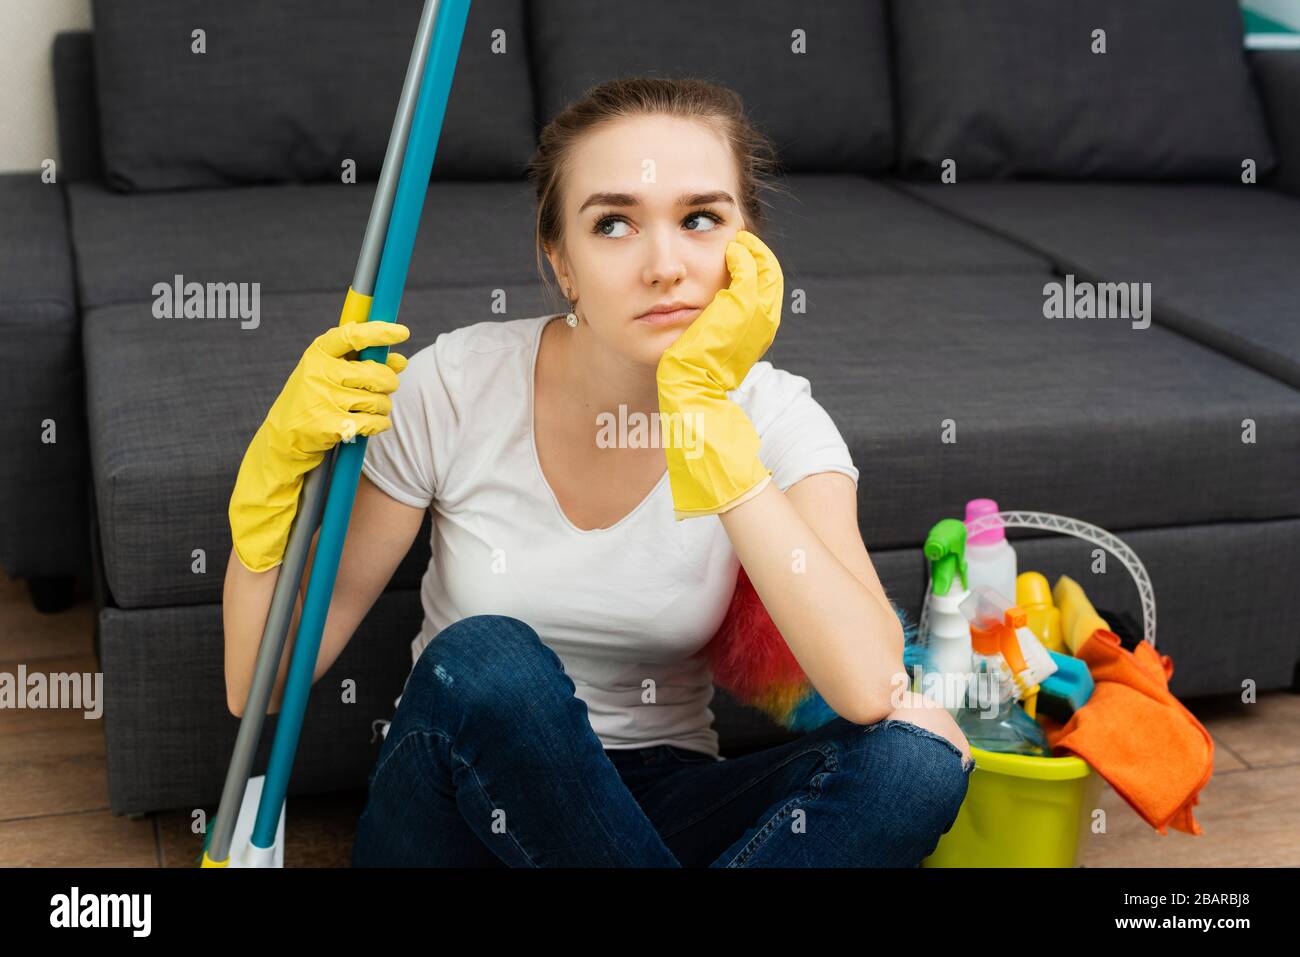 A beautiful woman in rubber gloves next to a coat and cleaning products gets angry at a lot of household chores. Problems of distribution of household duties. Stock Photo